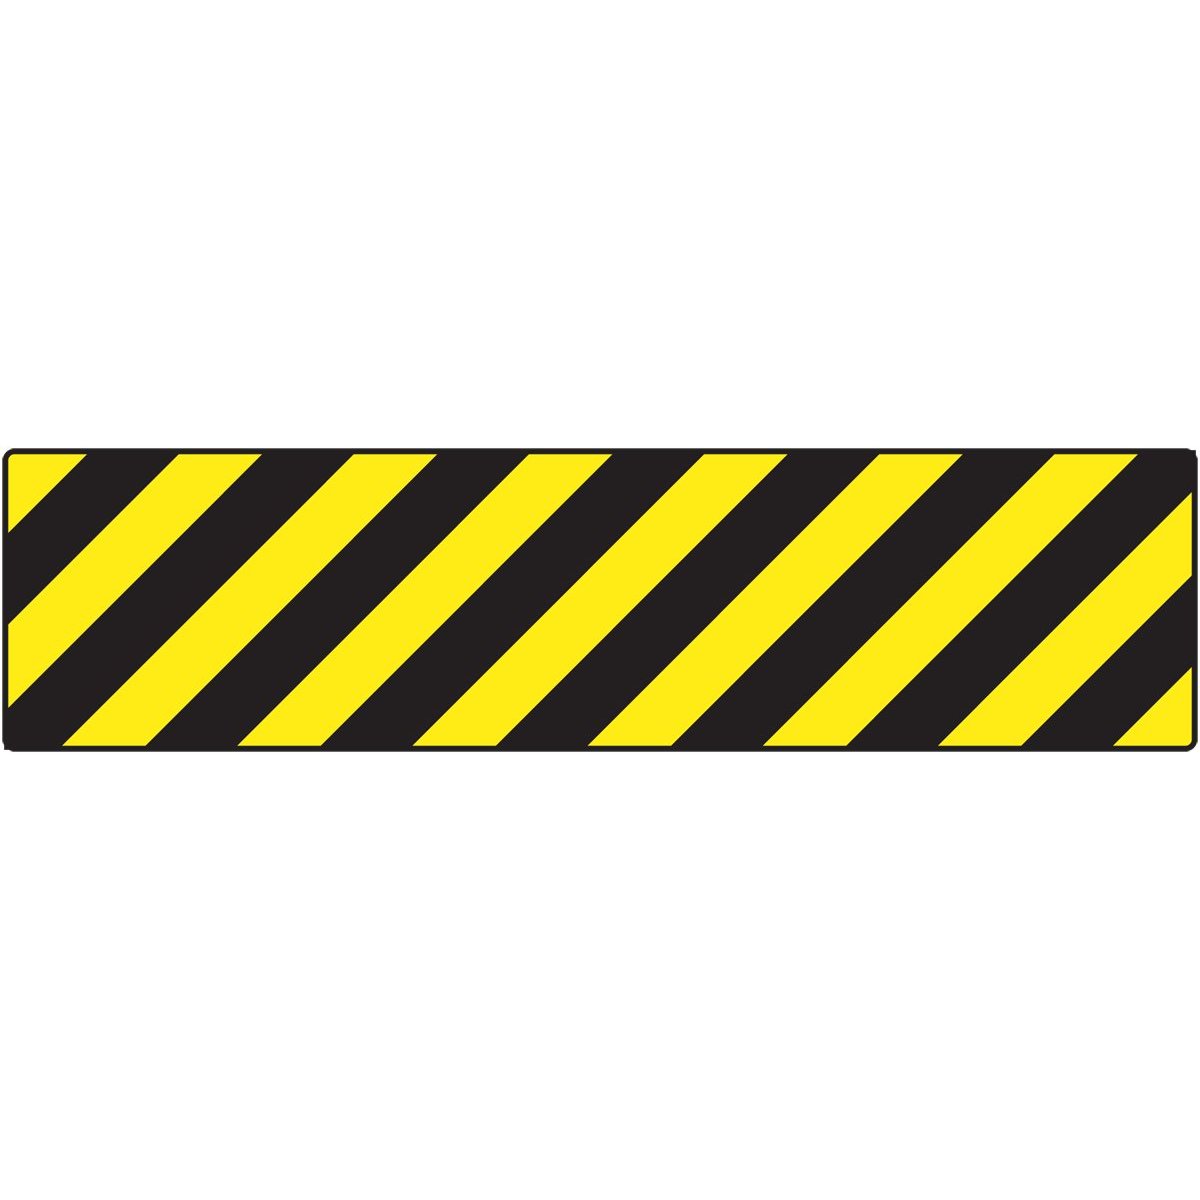 Warning tape clipart